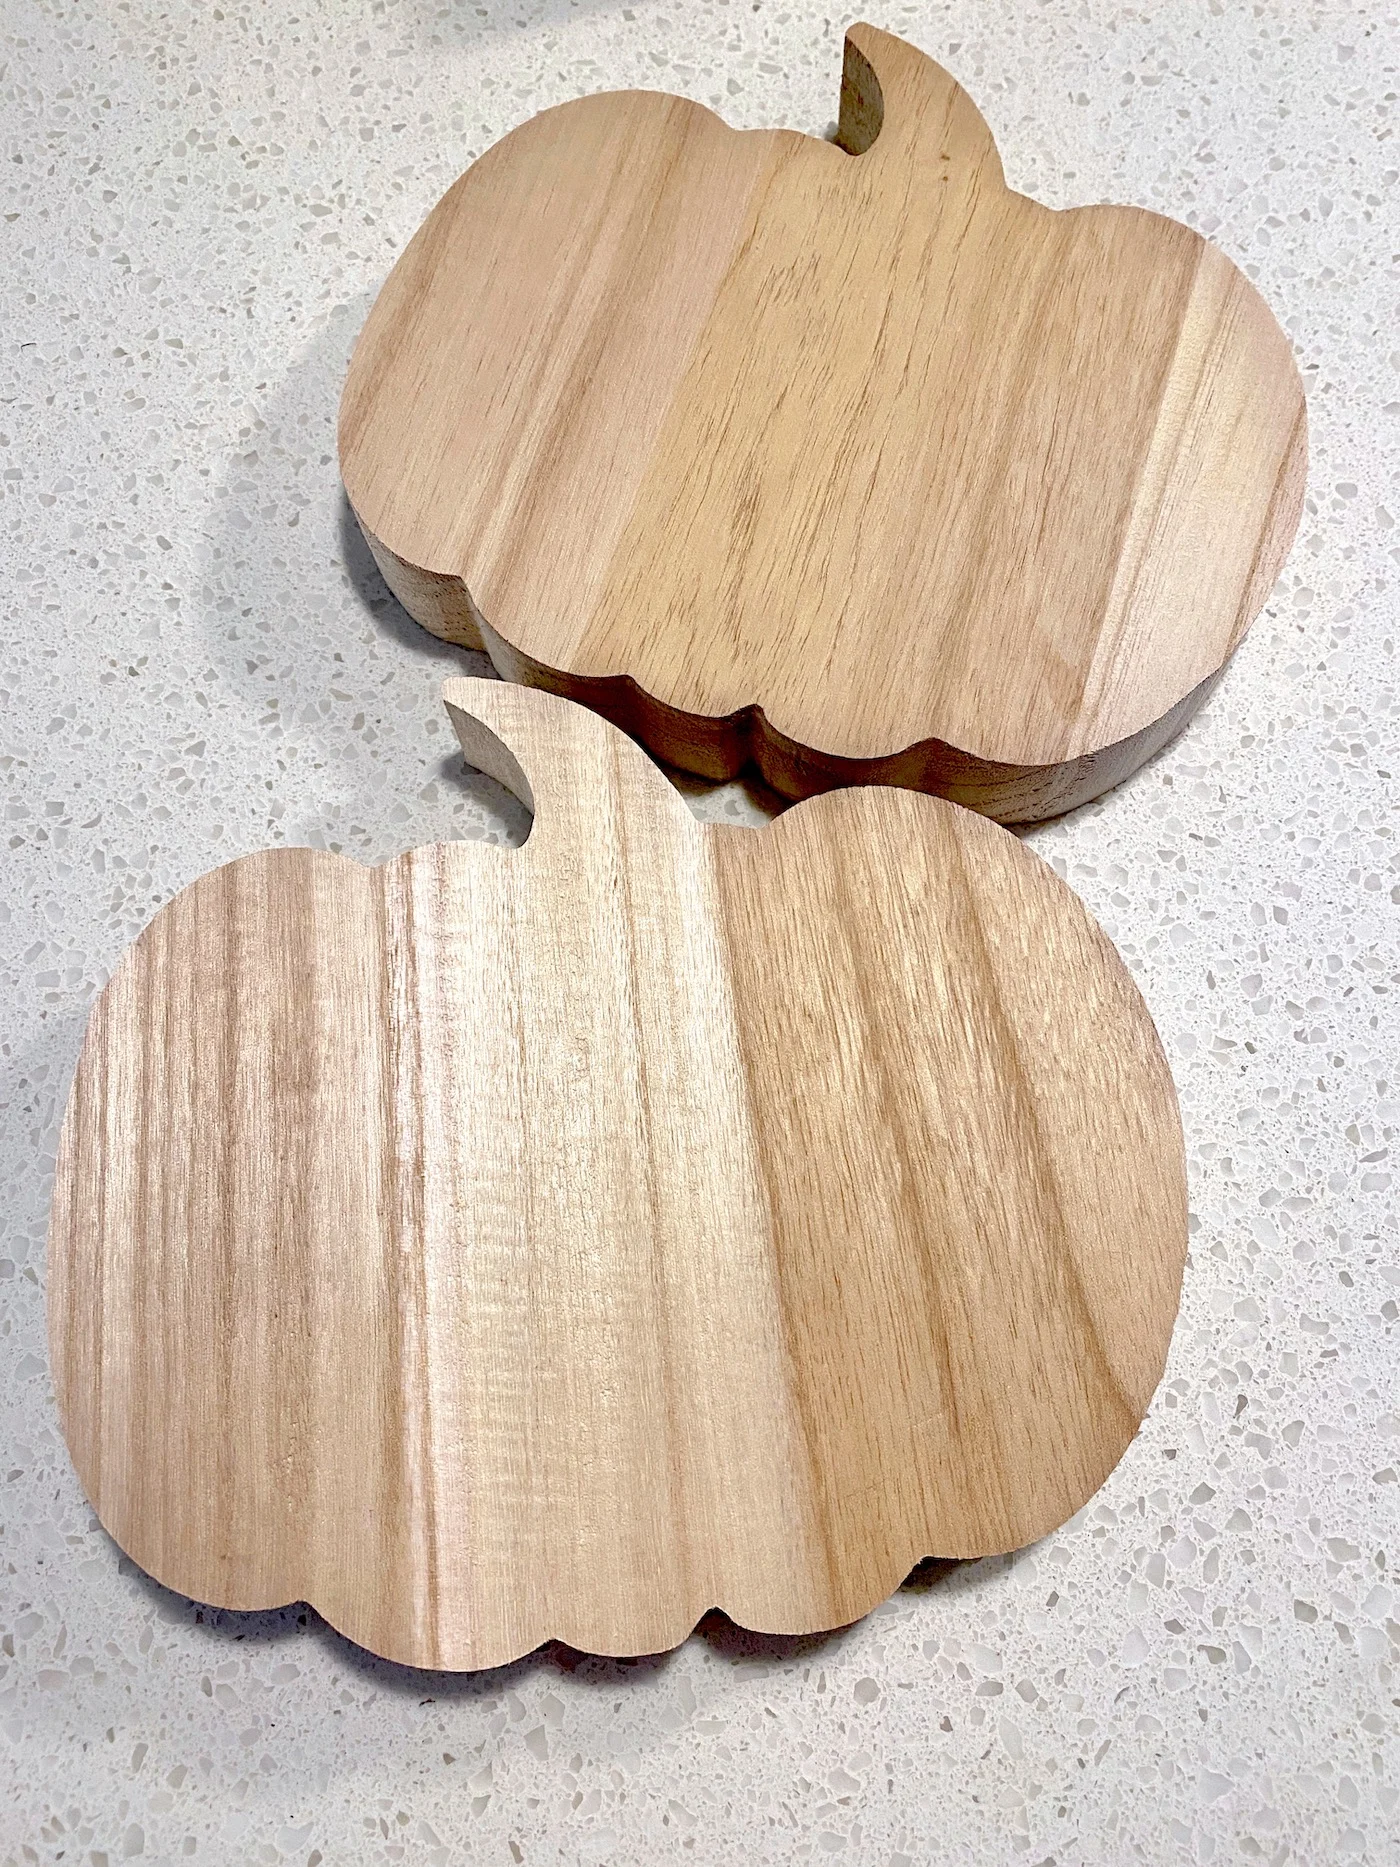 Two unfinished wood pumpkin shapes